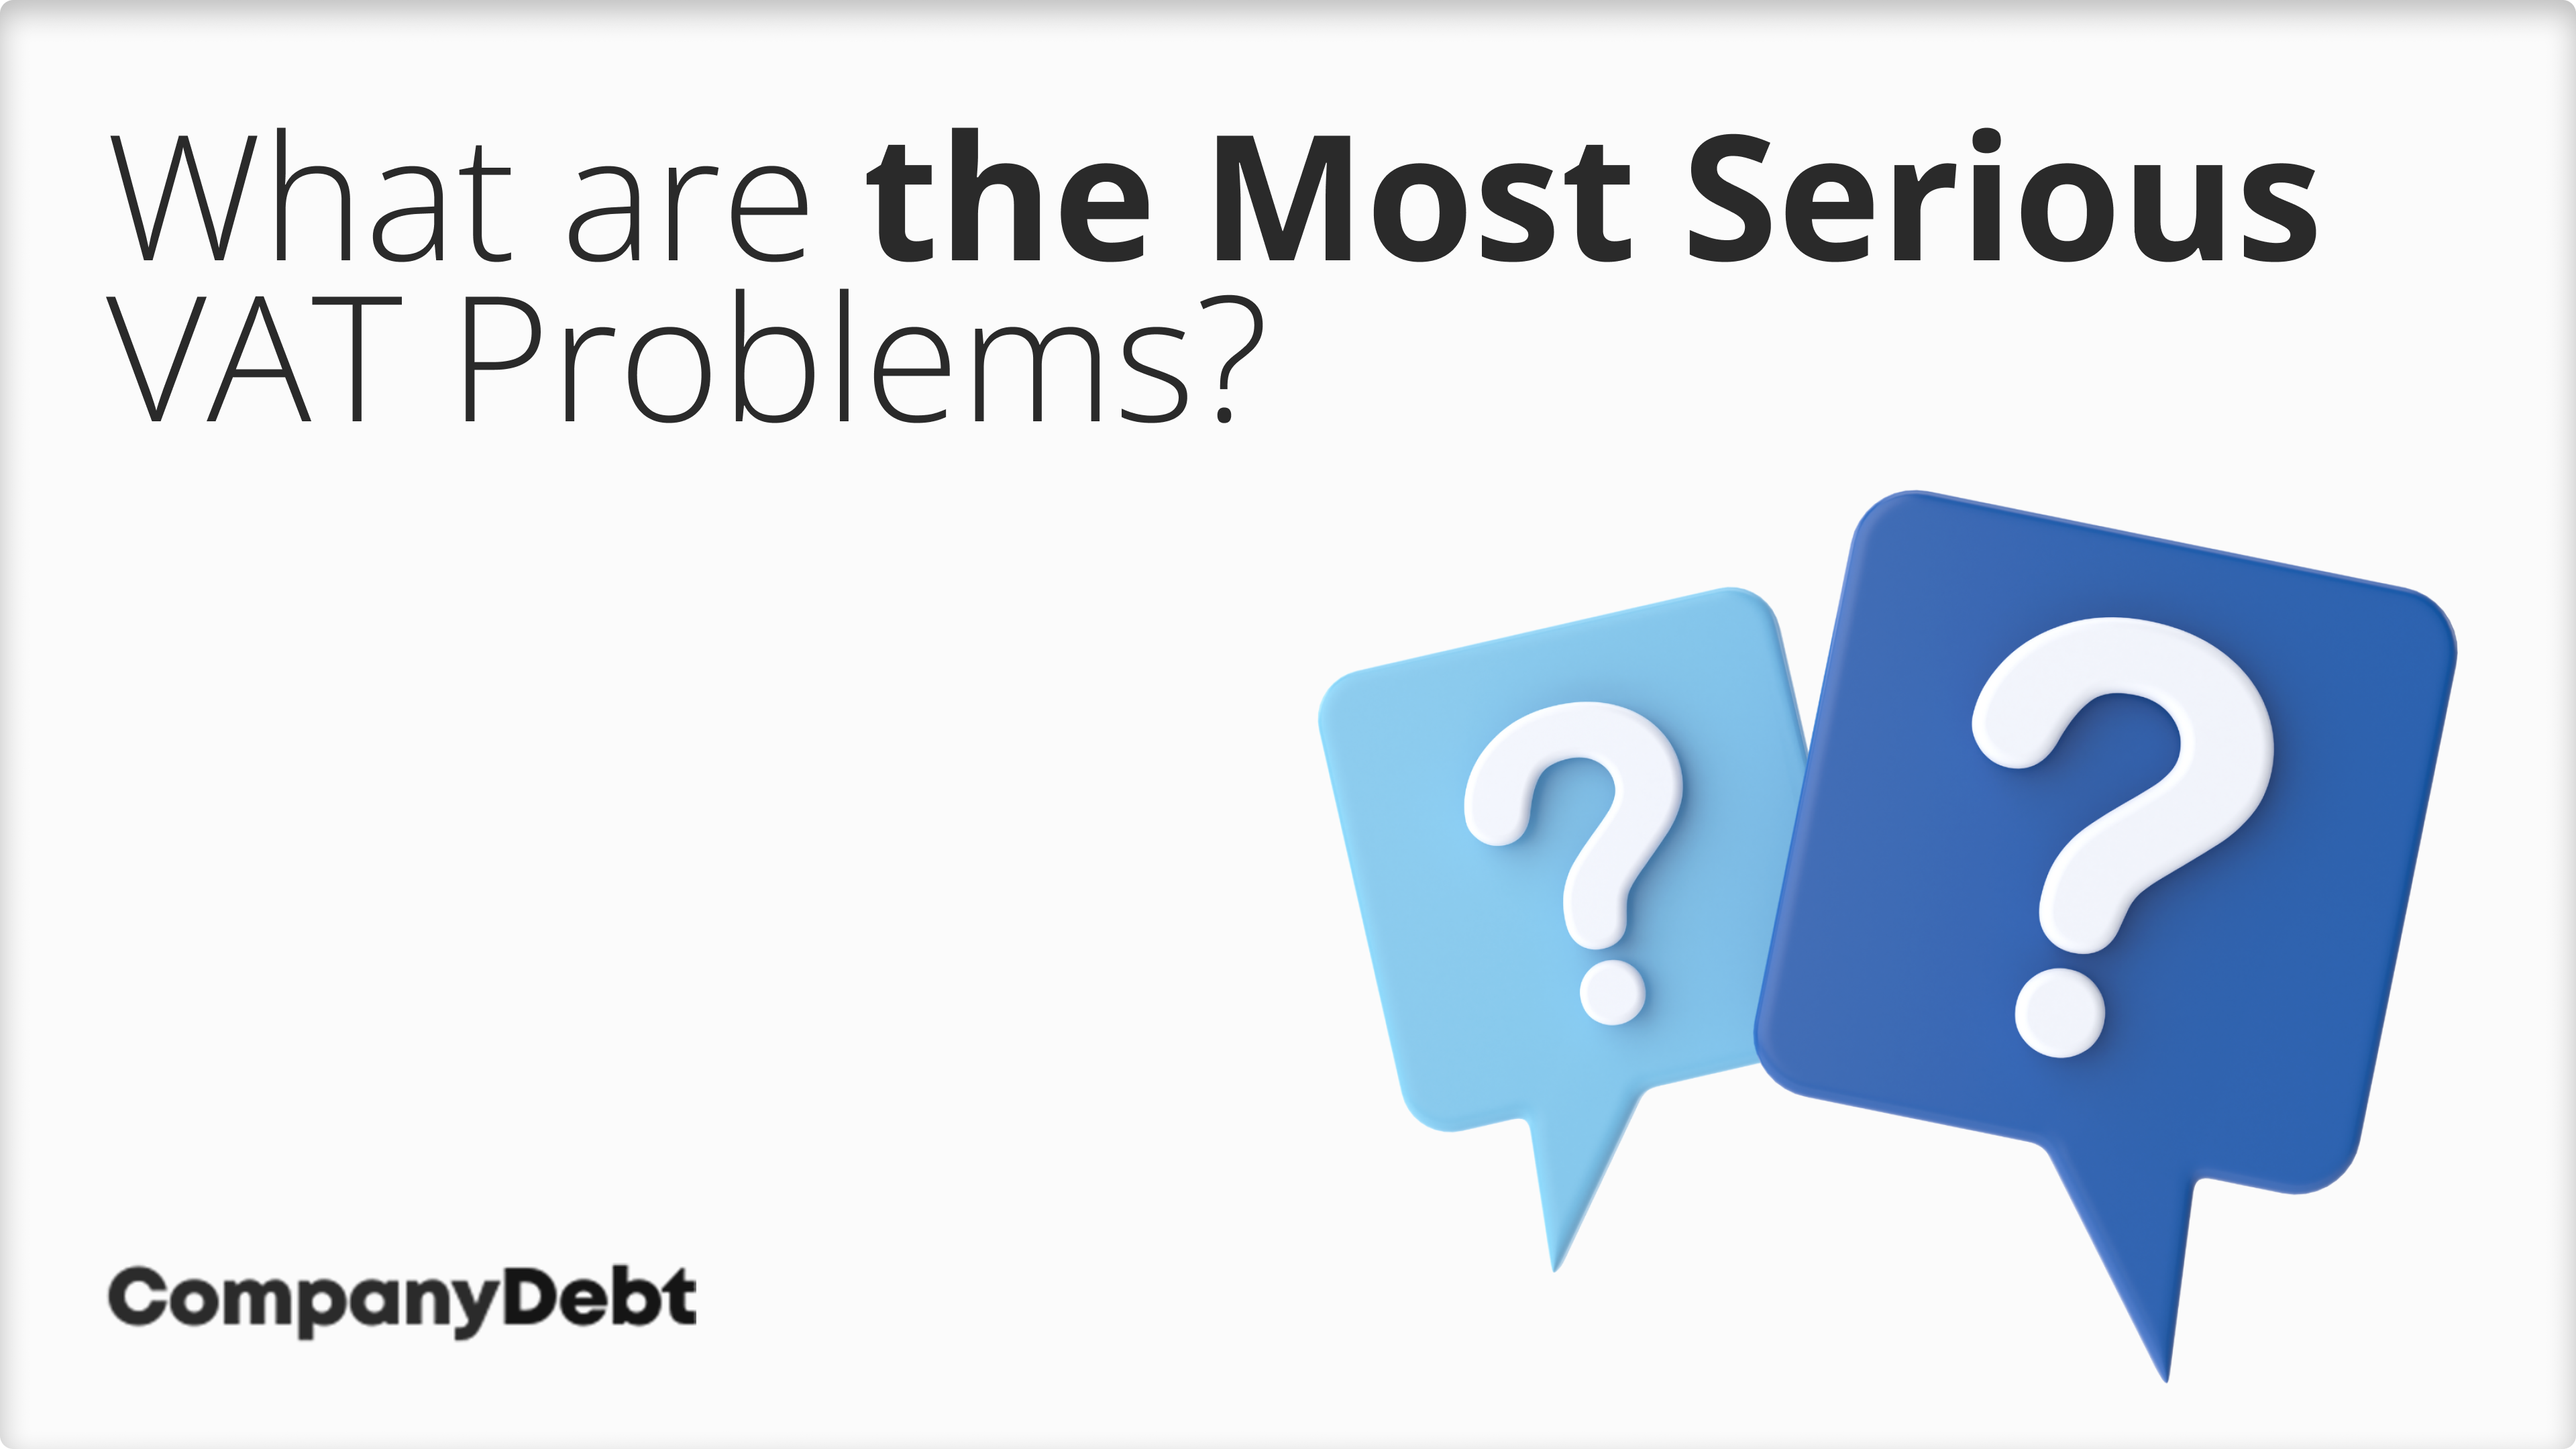 What are the Most Serious VAT Problems?